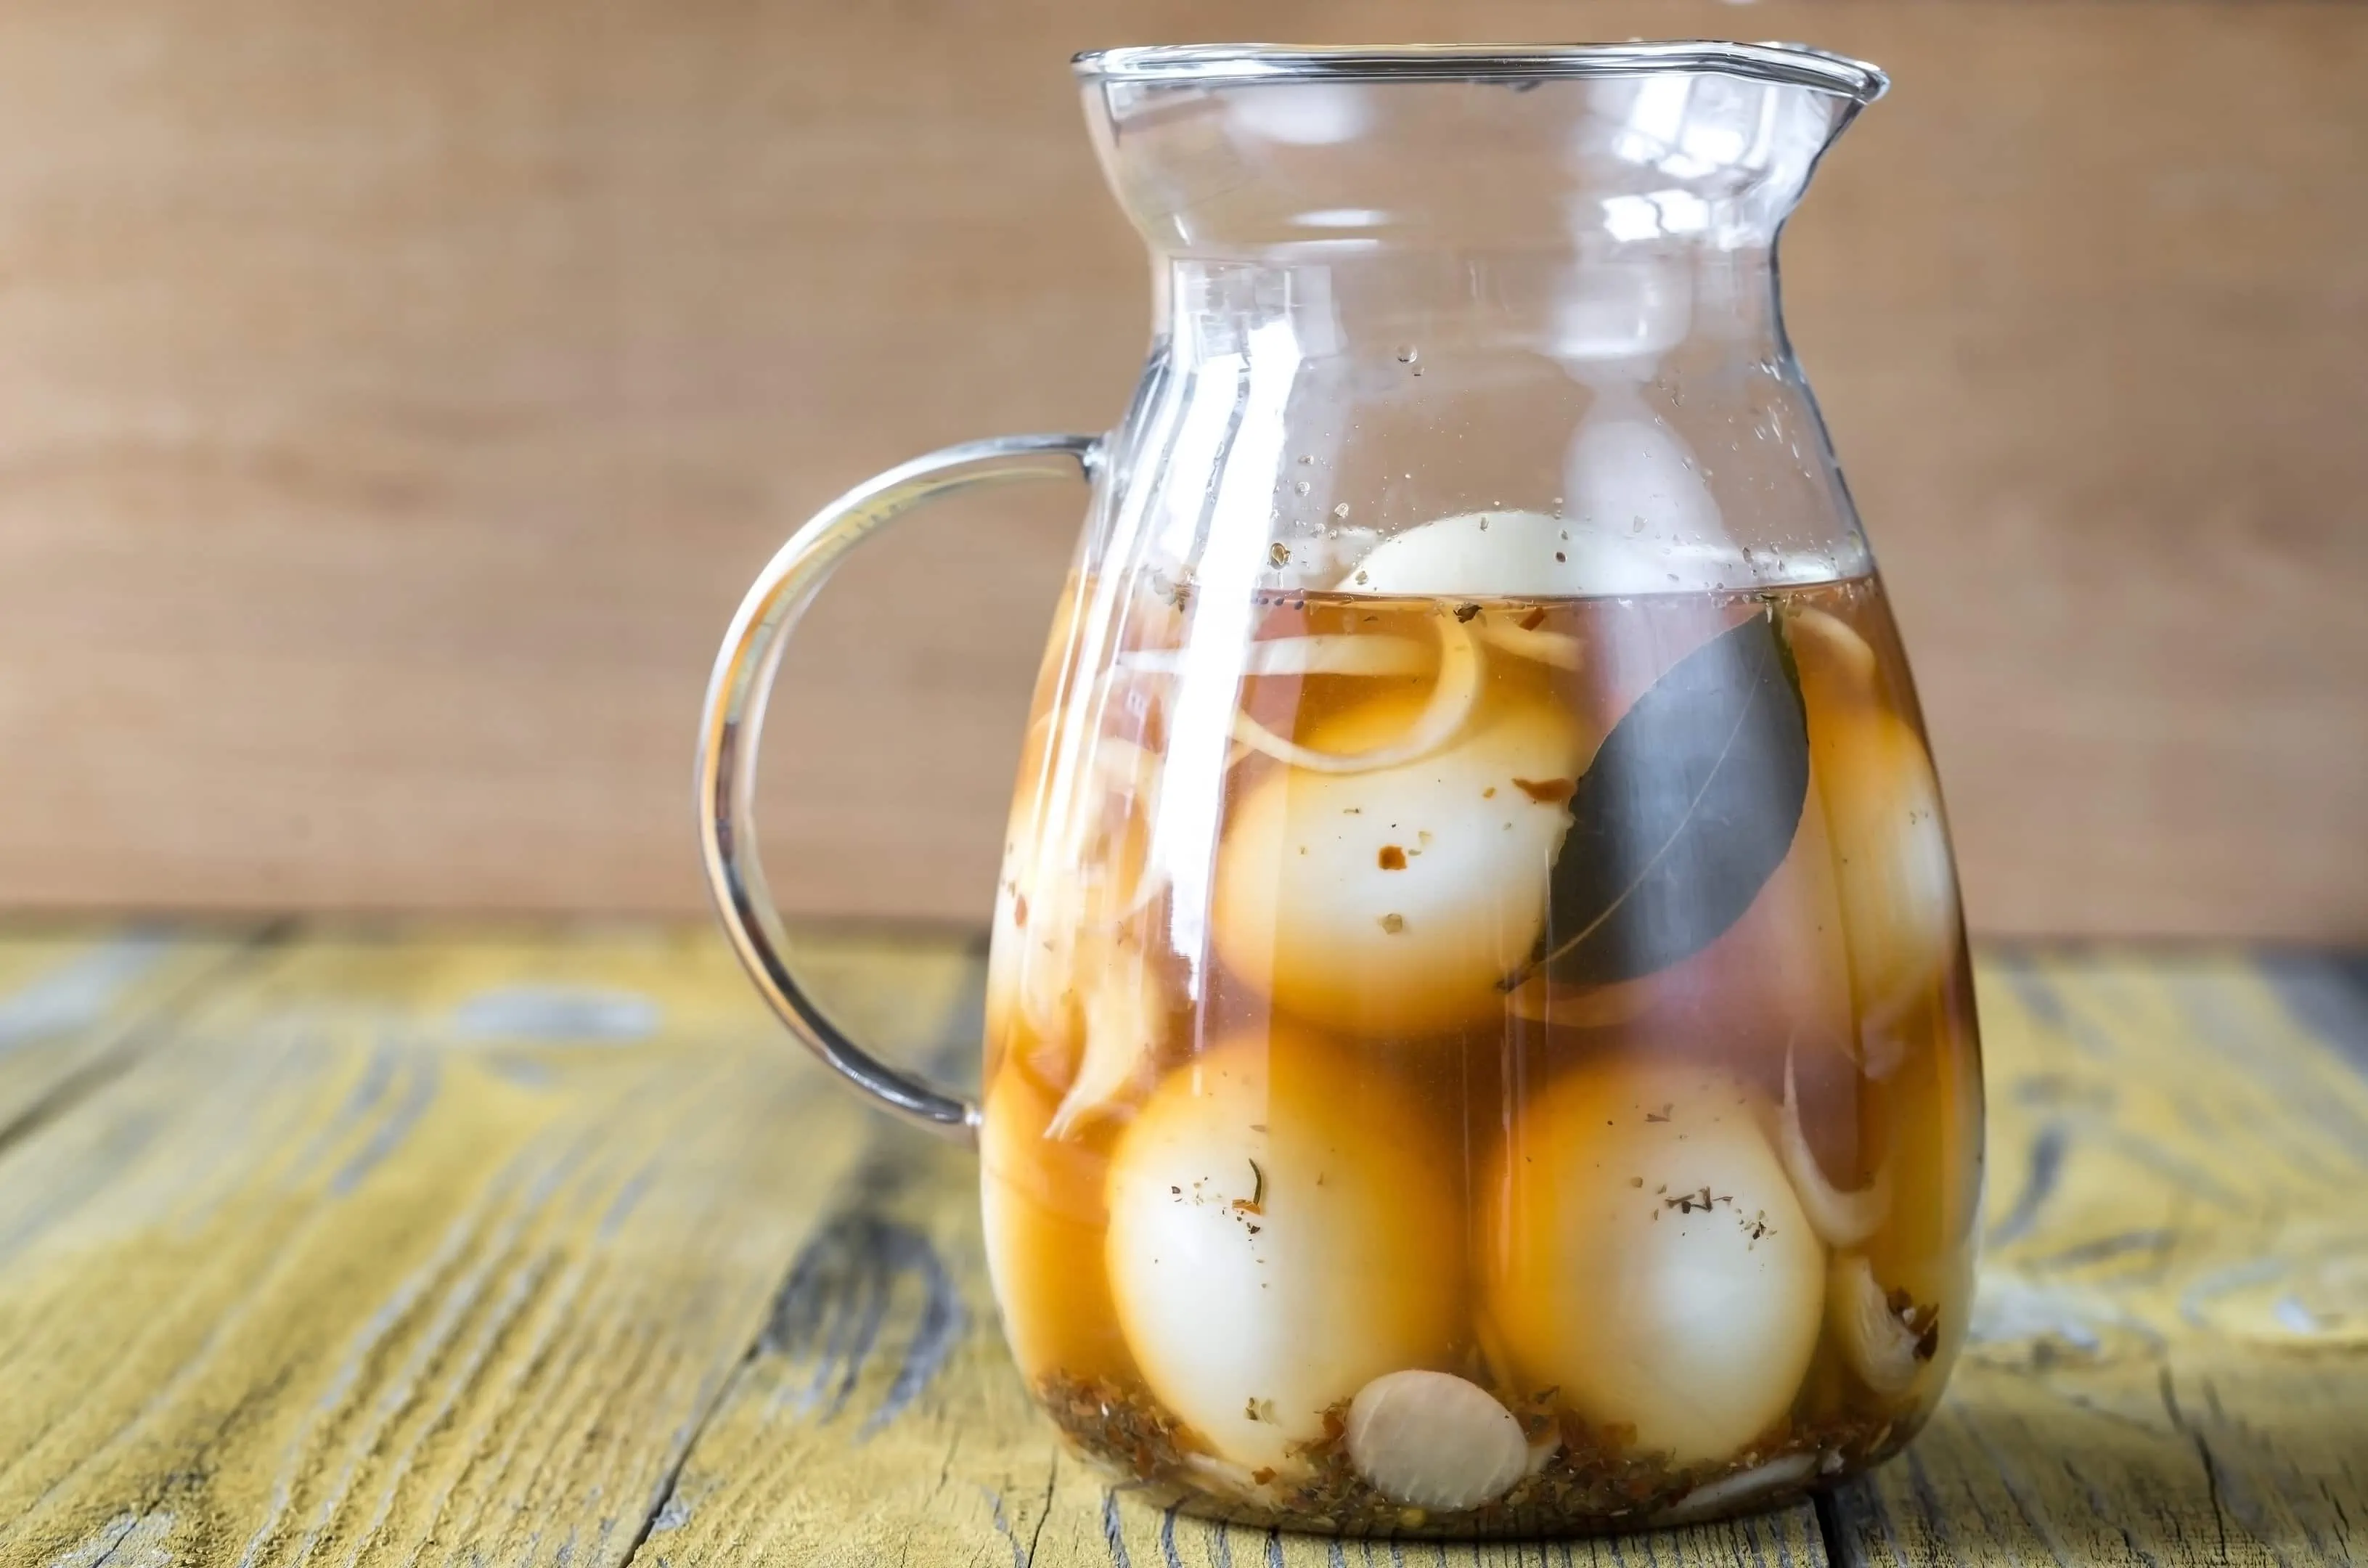 Tasty and spicy pickled eggs recipe